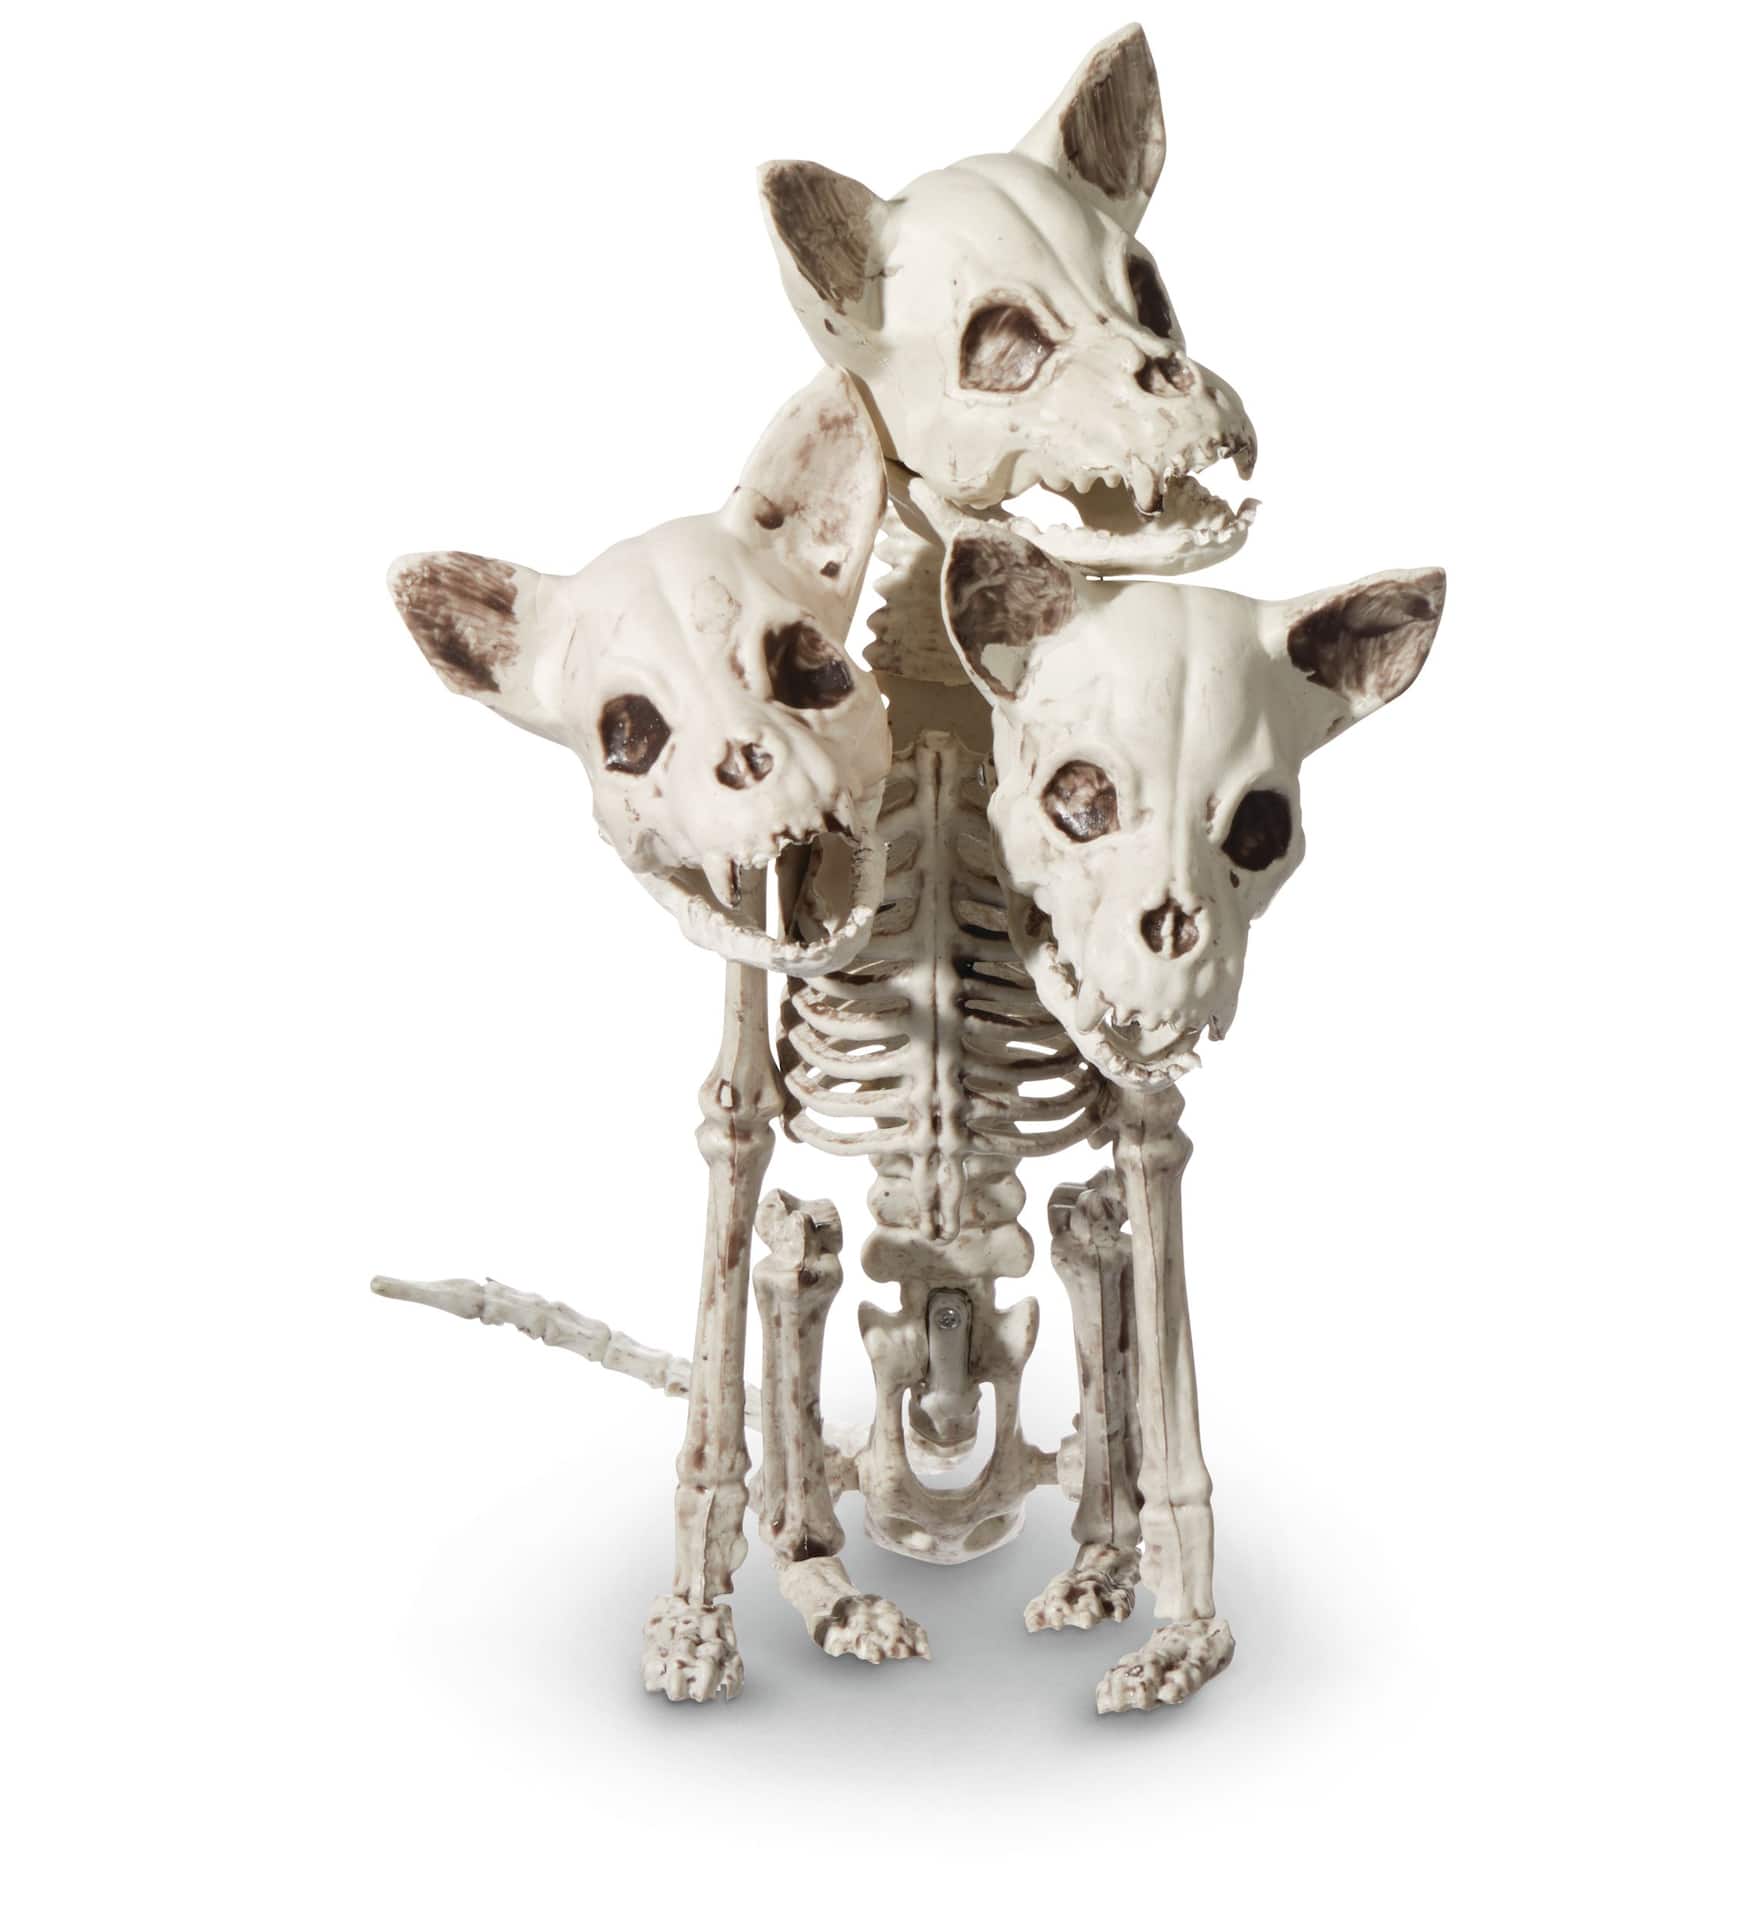 For Living Skeleton Dog Three Headed Prop, White, 12 3/4-in, Indoor/Outdoor  Decoration for Halloween